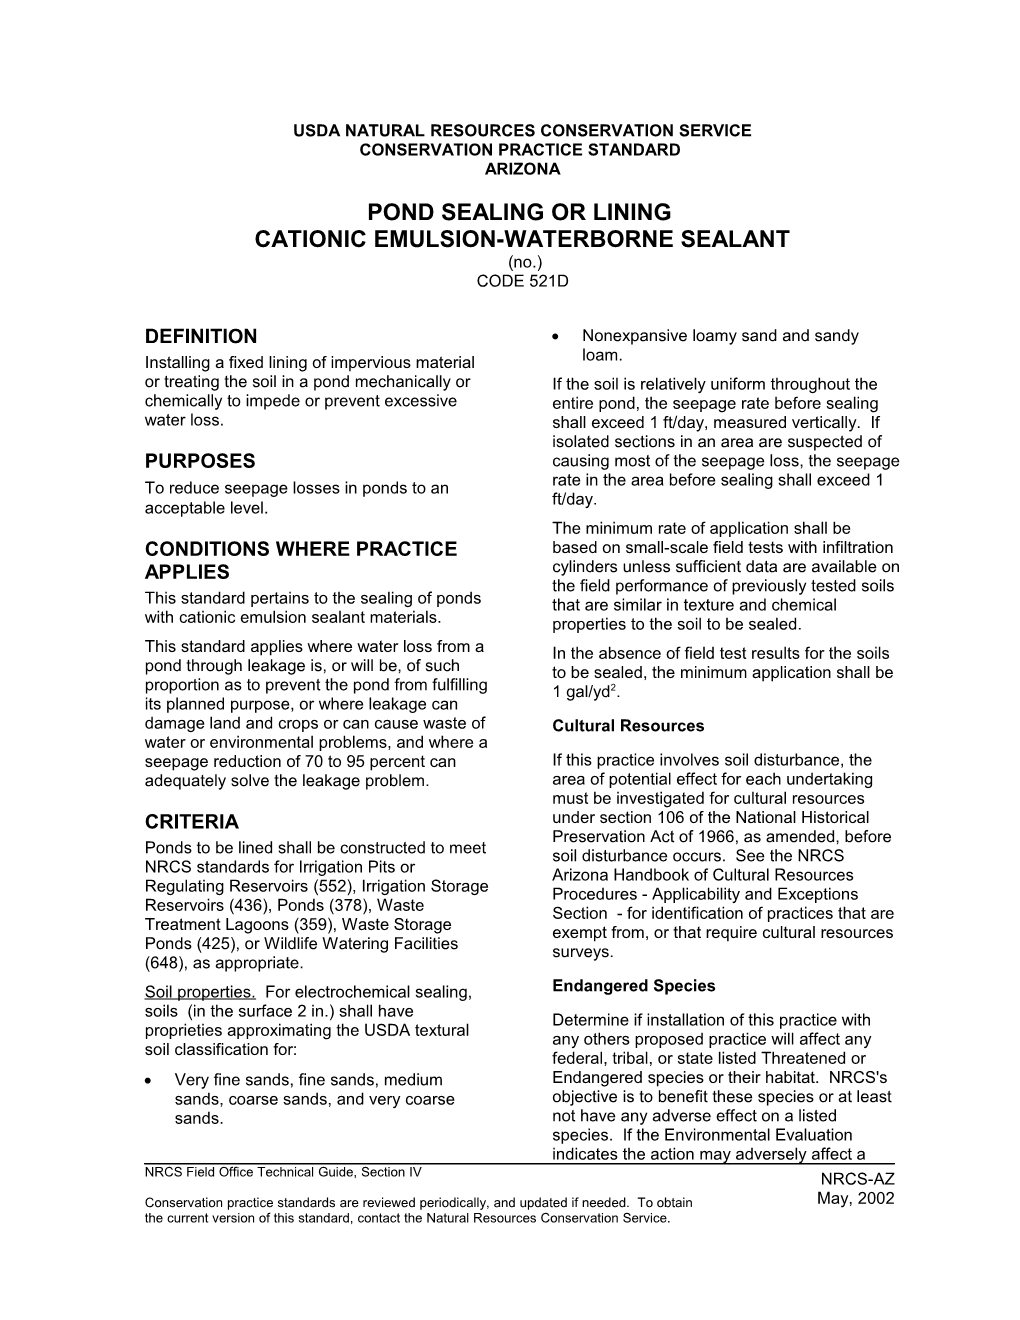 Pond Sealing-Cationic Emulsion 521-D